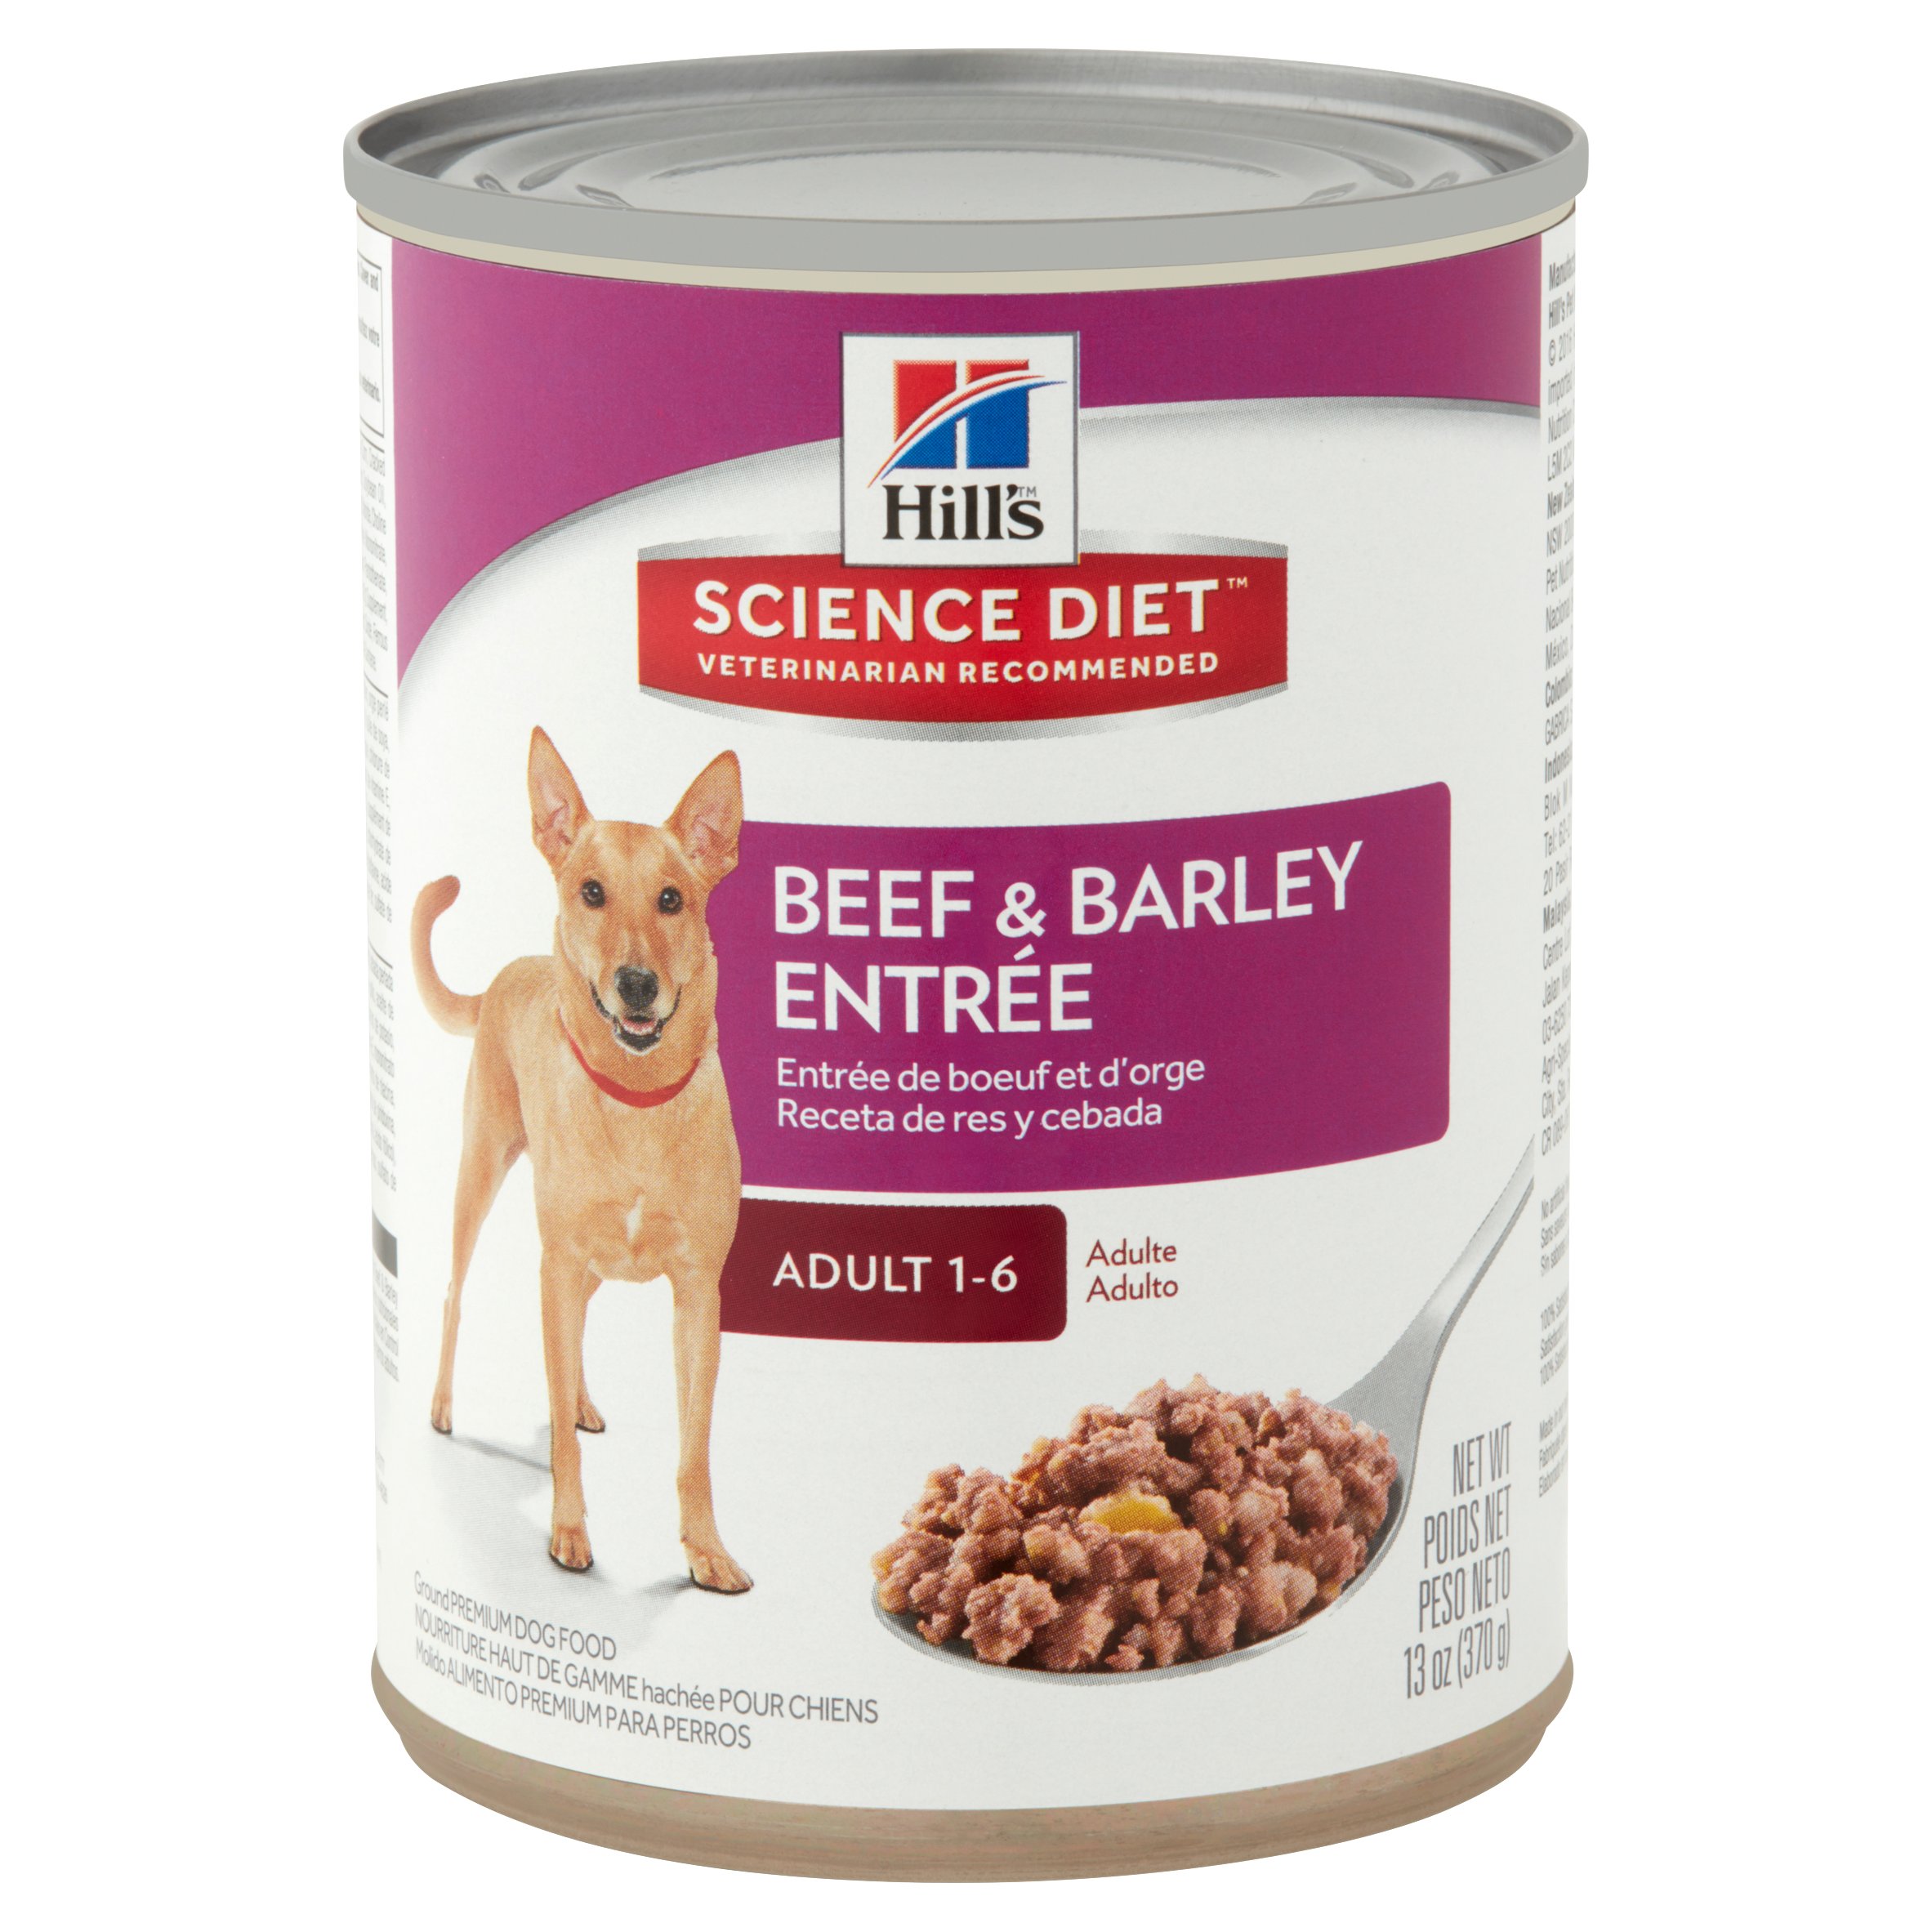 Hill's Science Diet Adult Beef & Barley Entree Wet Dog Food, 13 Oz. - image 2 of 4